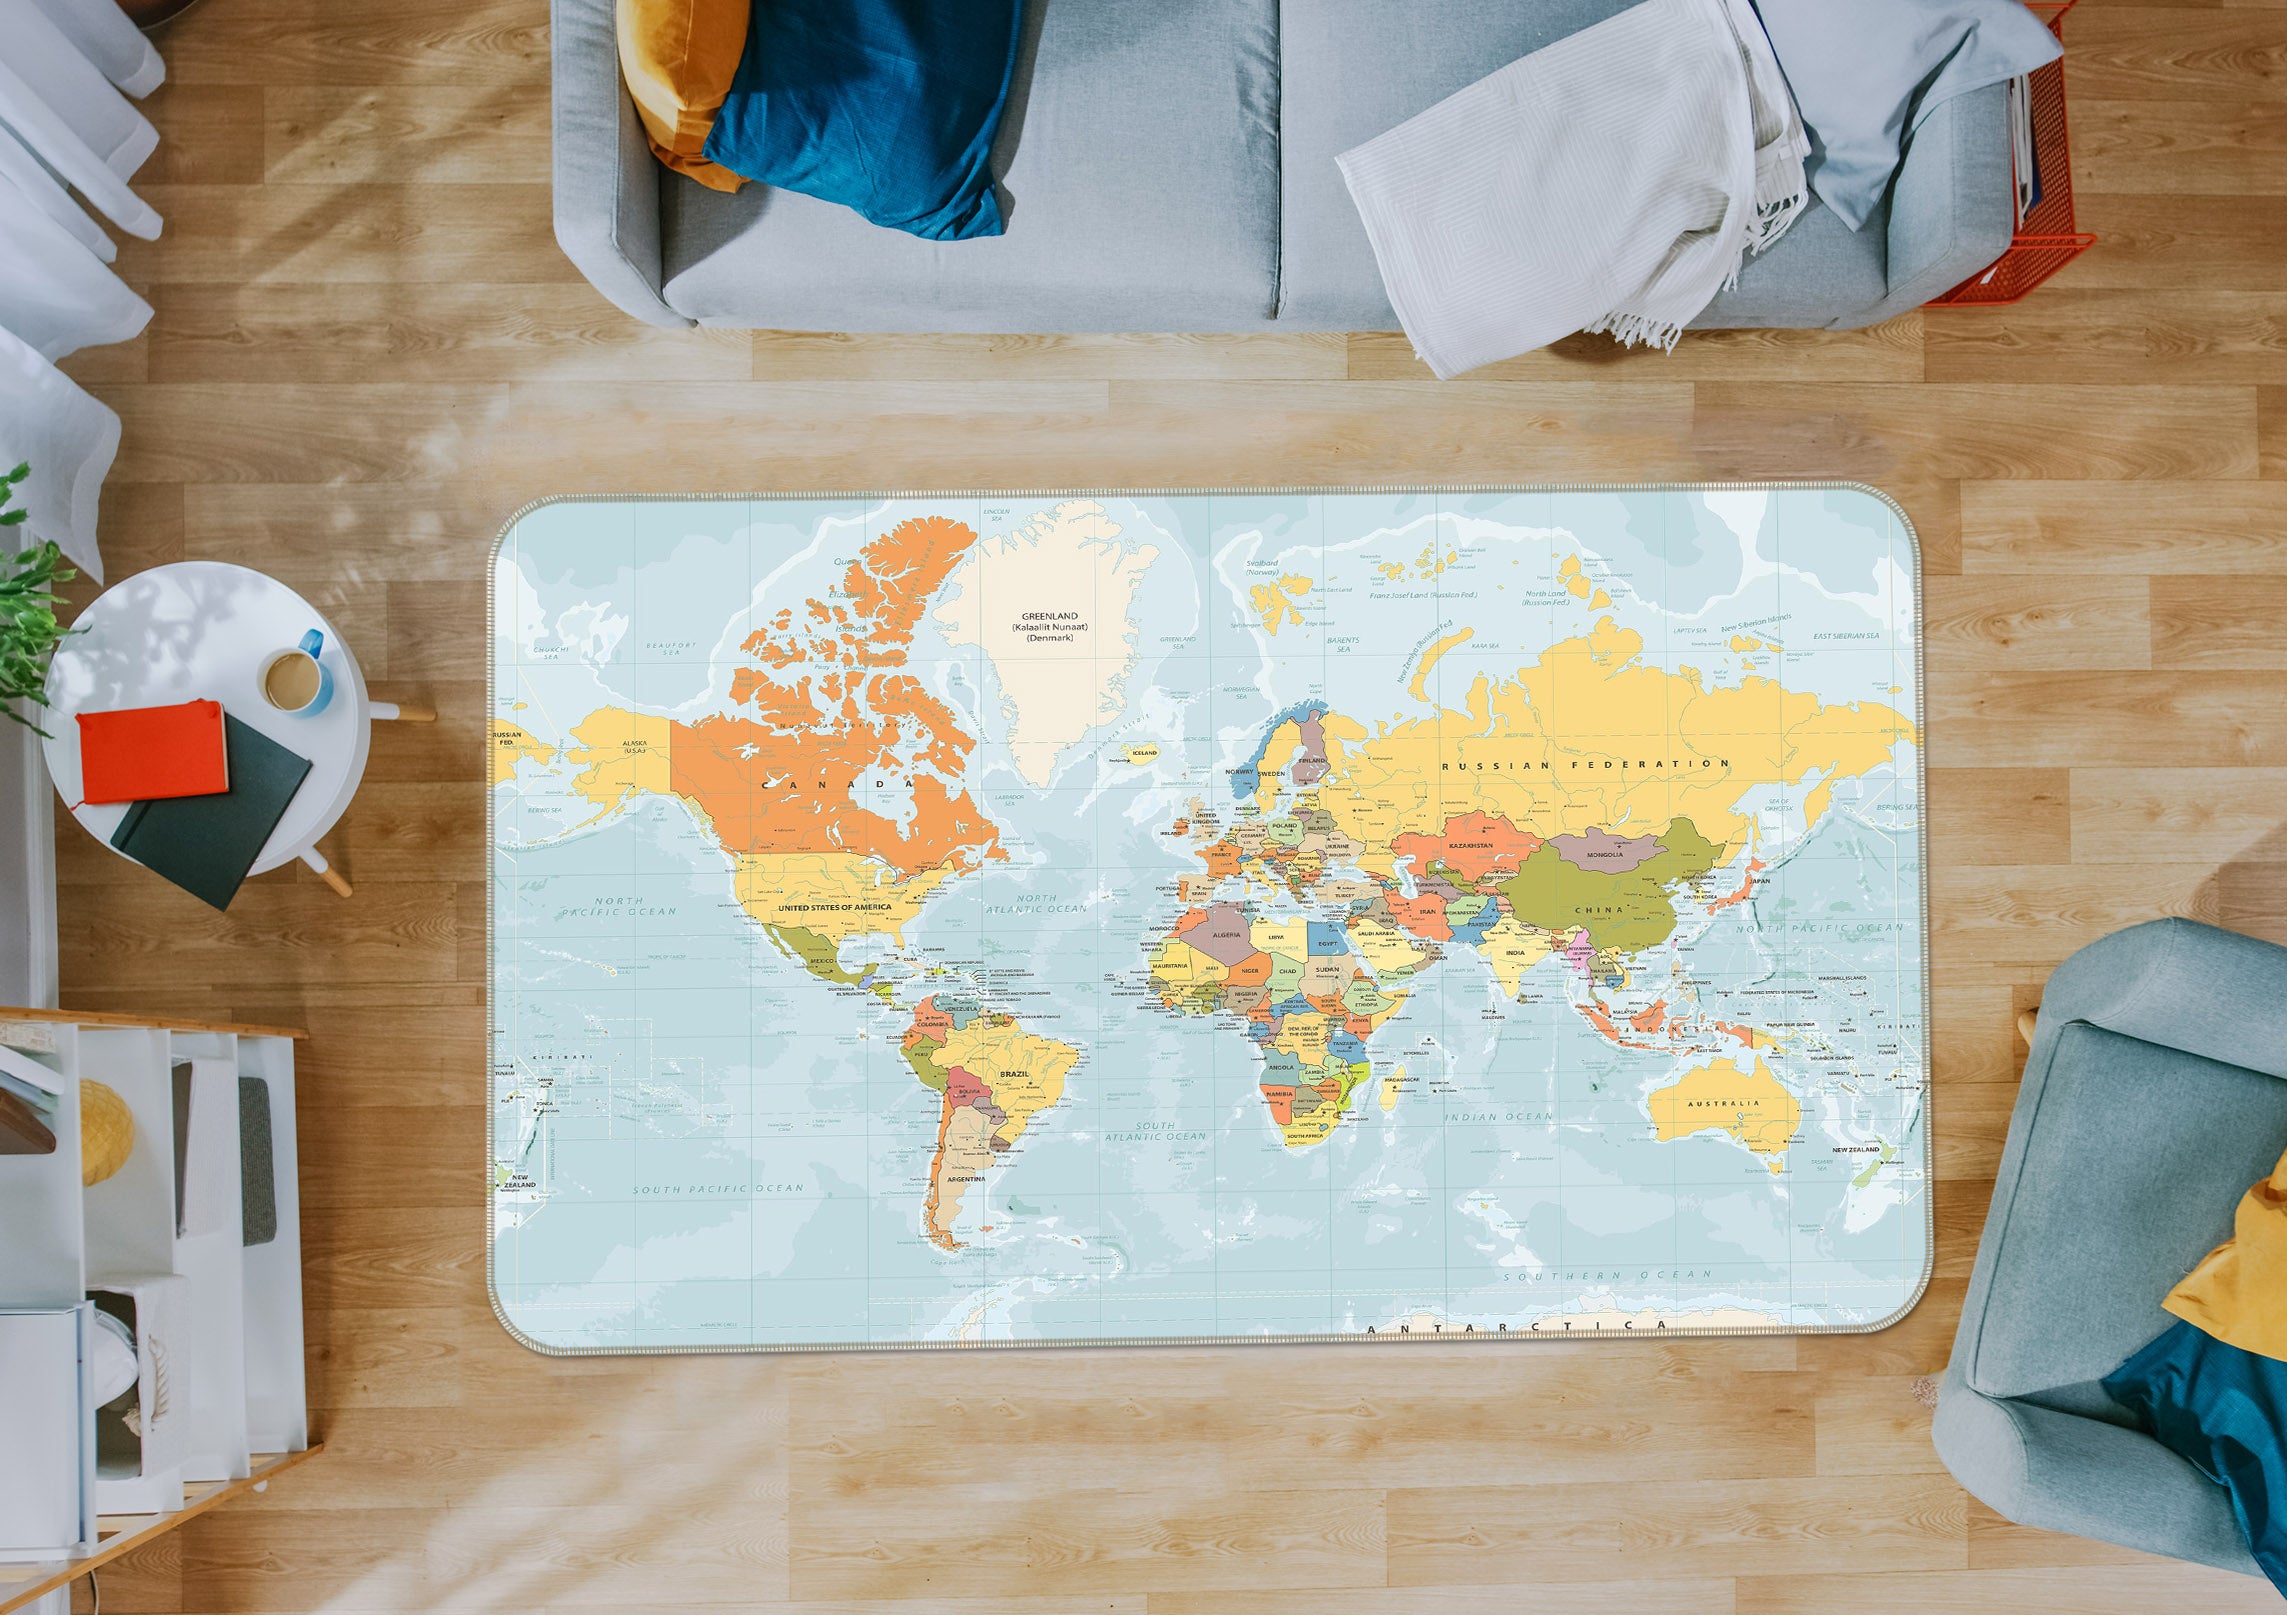 3D Color Clouds 271 World Map Non Slip Rug Mat